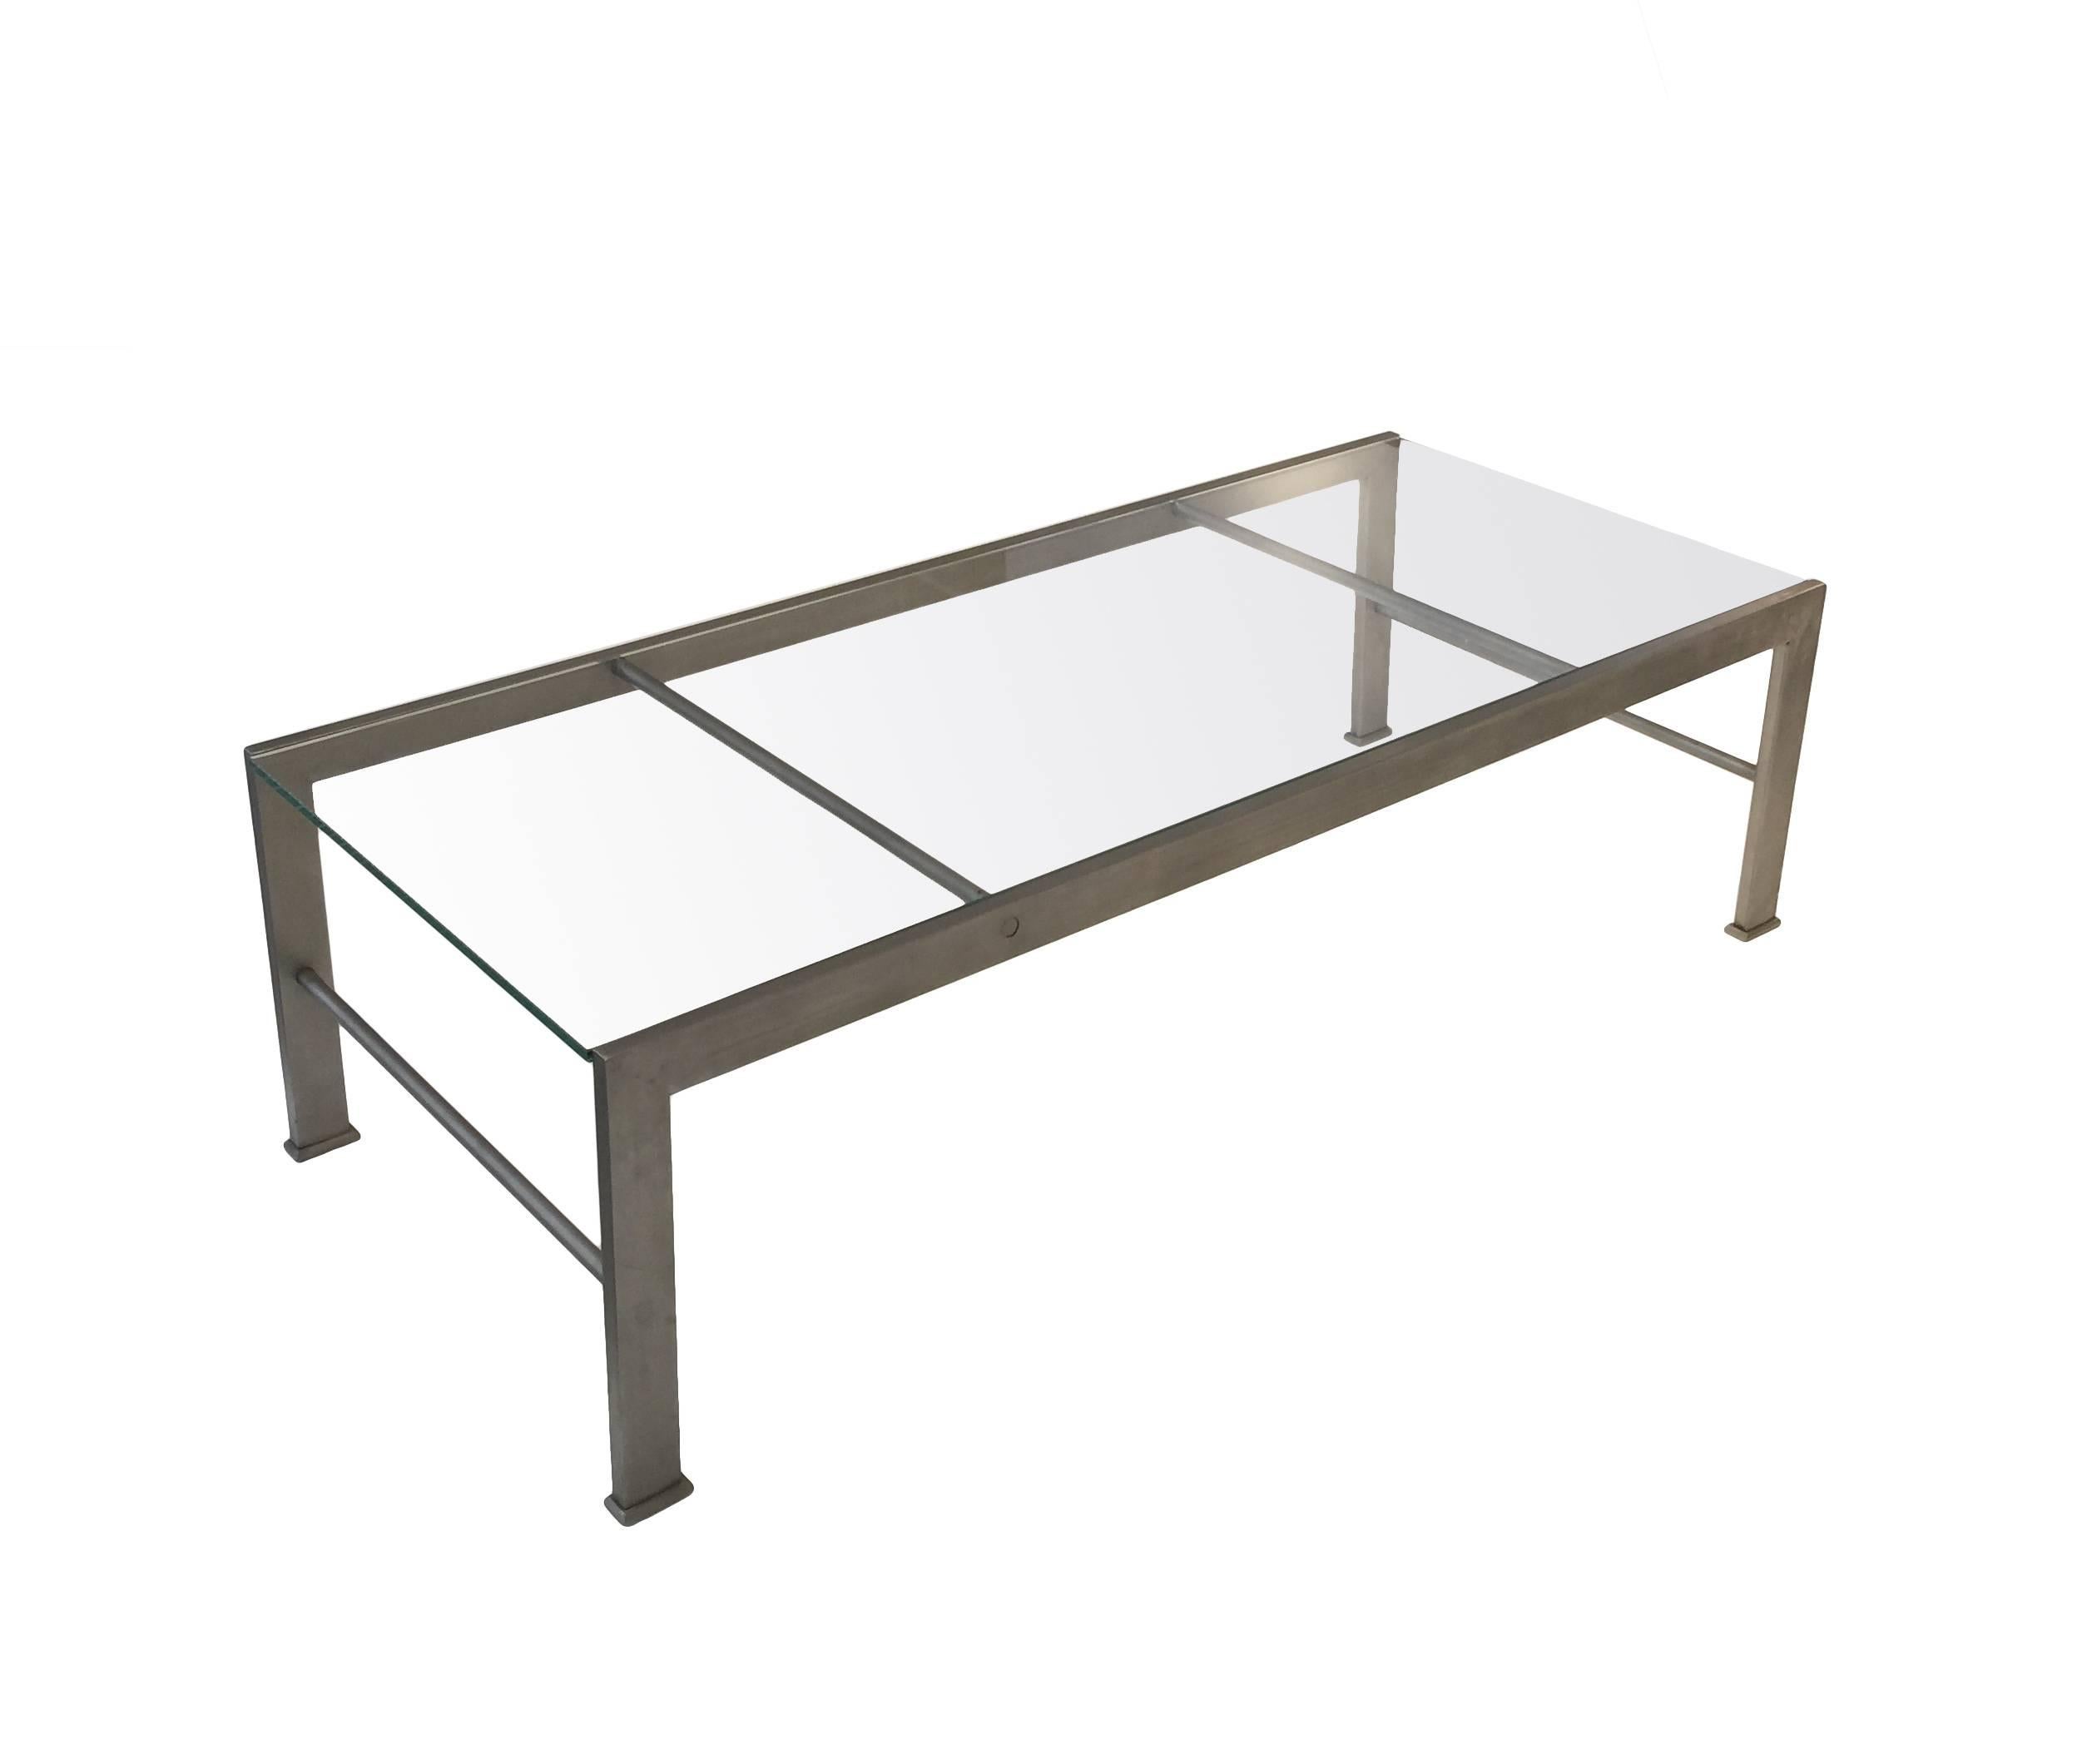 A metal and glass coffee table after a design by Marc du Plantier

Marc du Plantier (1901-1975) created the design for this table circa 1934 for the home of a M. Bignon, Paris. His original design was for a table of gilt iron and glass and he